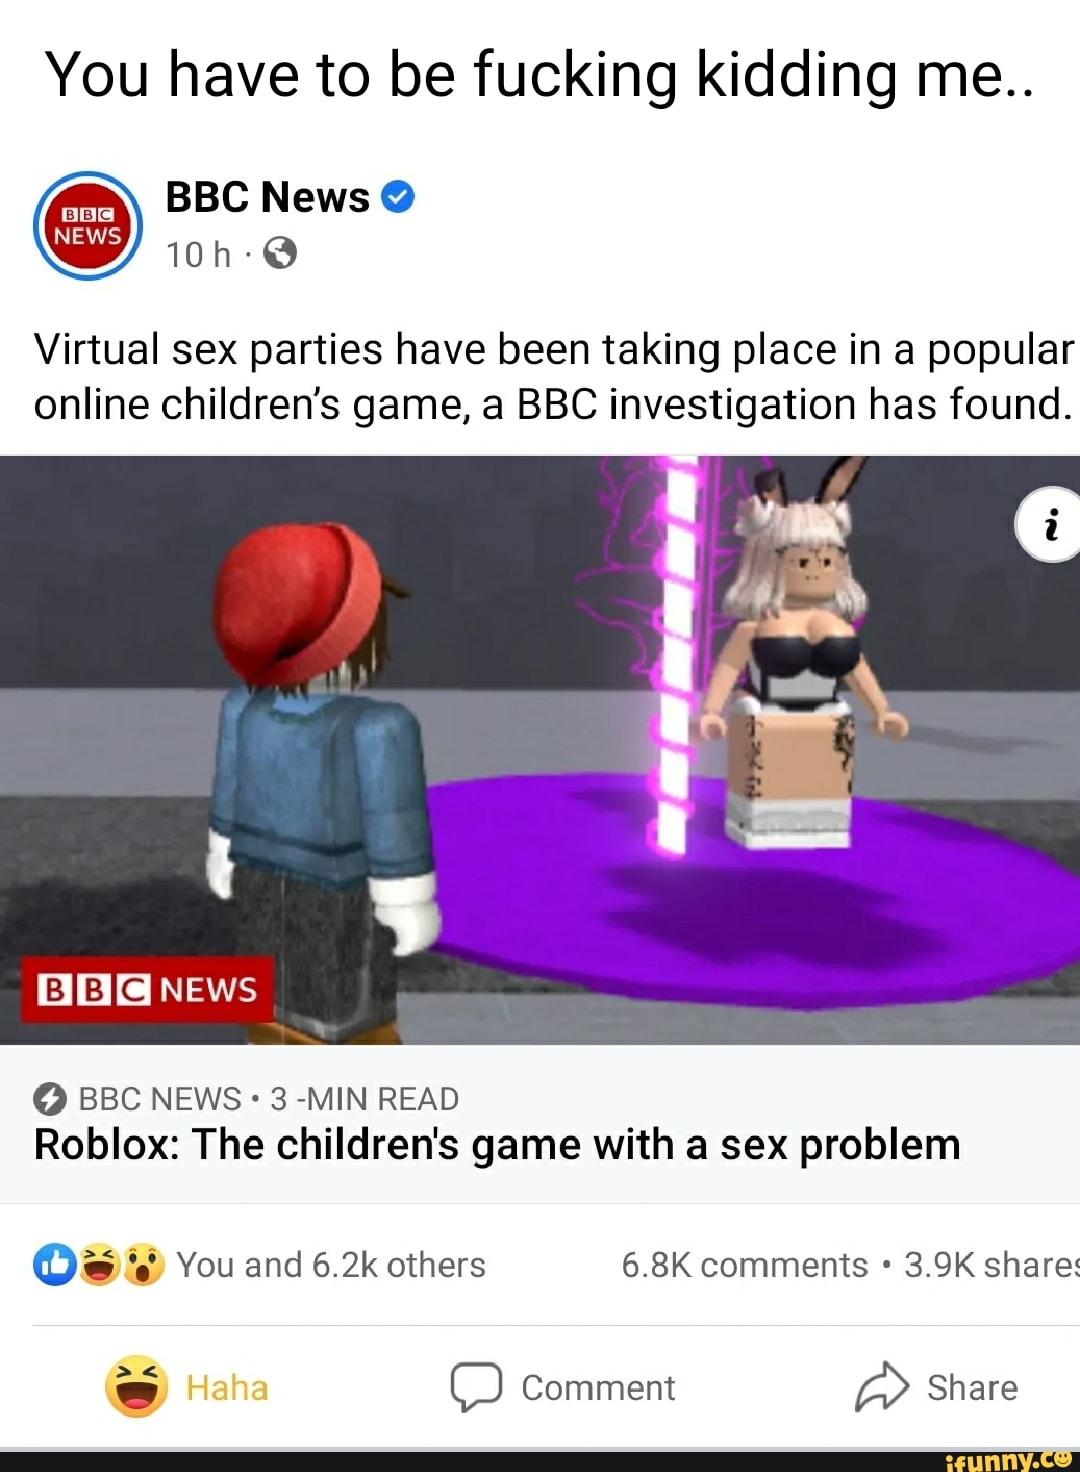 Roblox: The children's game with a sex problem